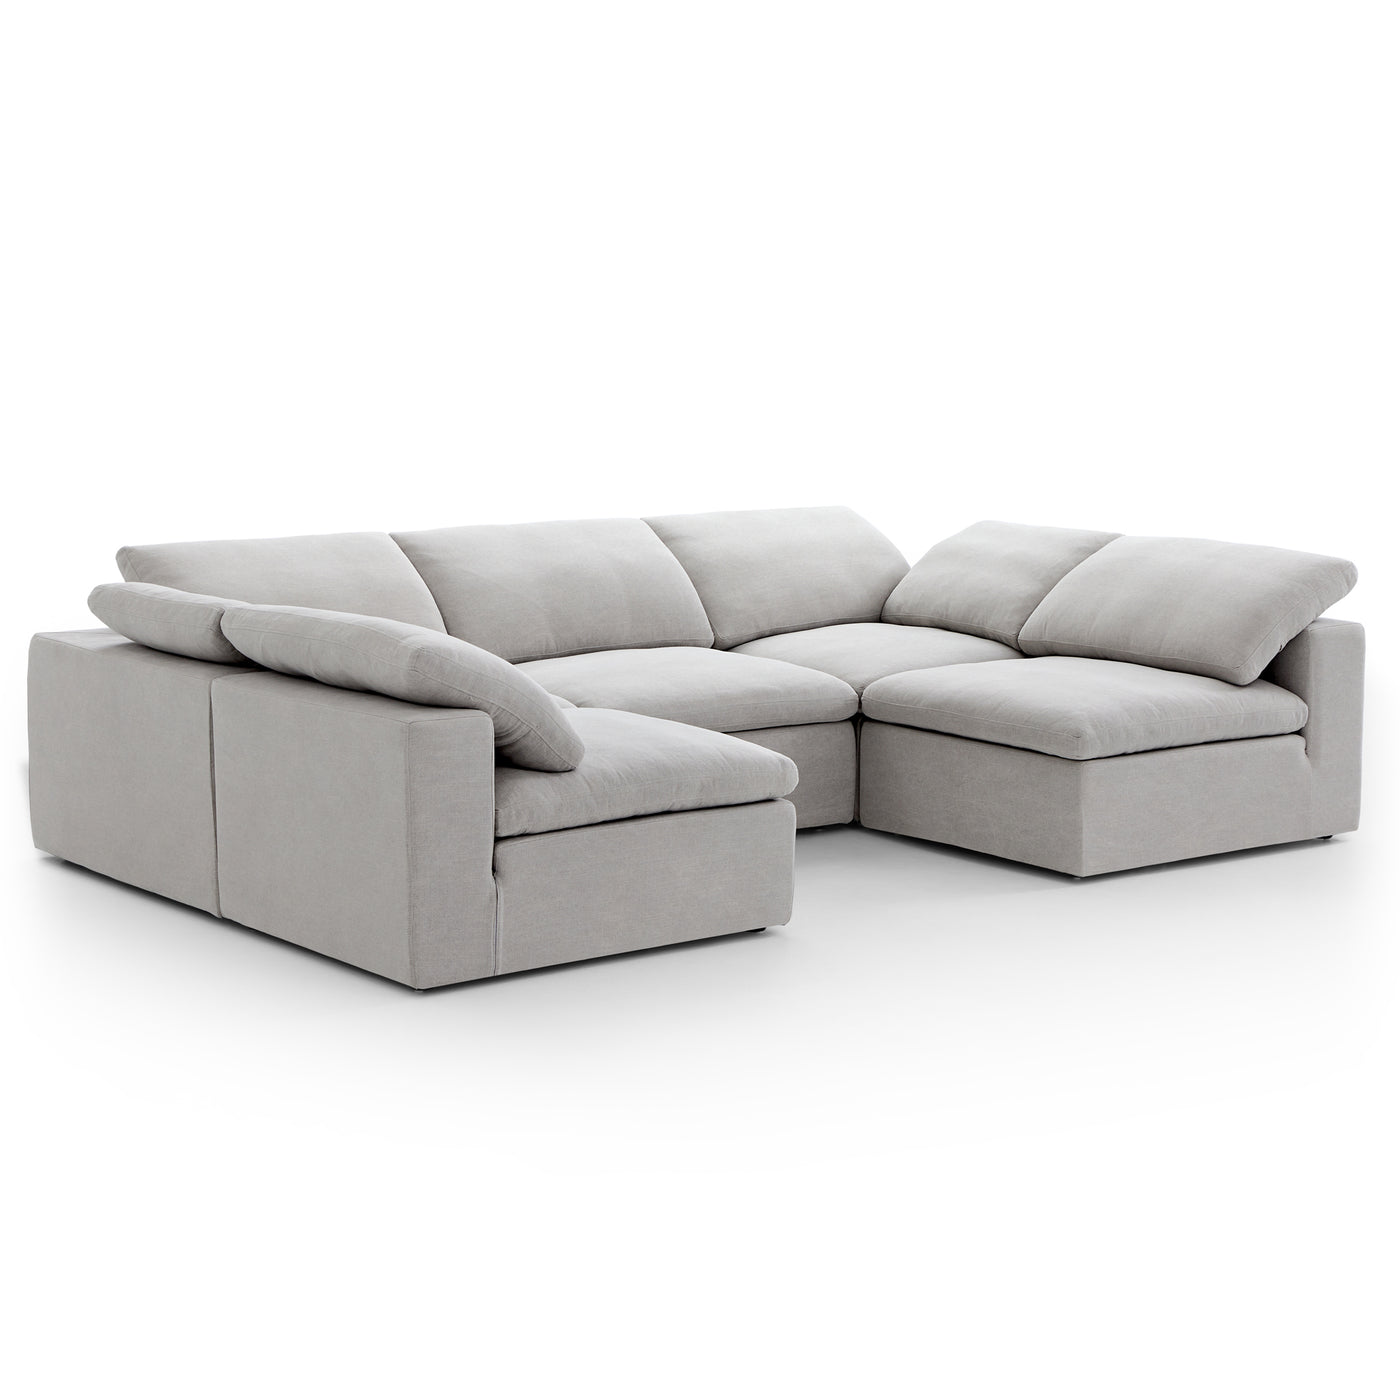 Tender Wabi Sabi Light Gray U Shaped Sectional with Open Ends-Gray-128.0"